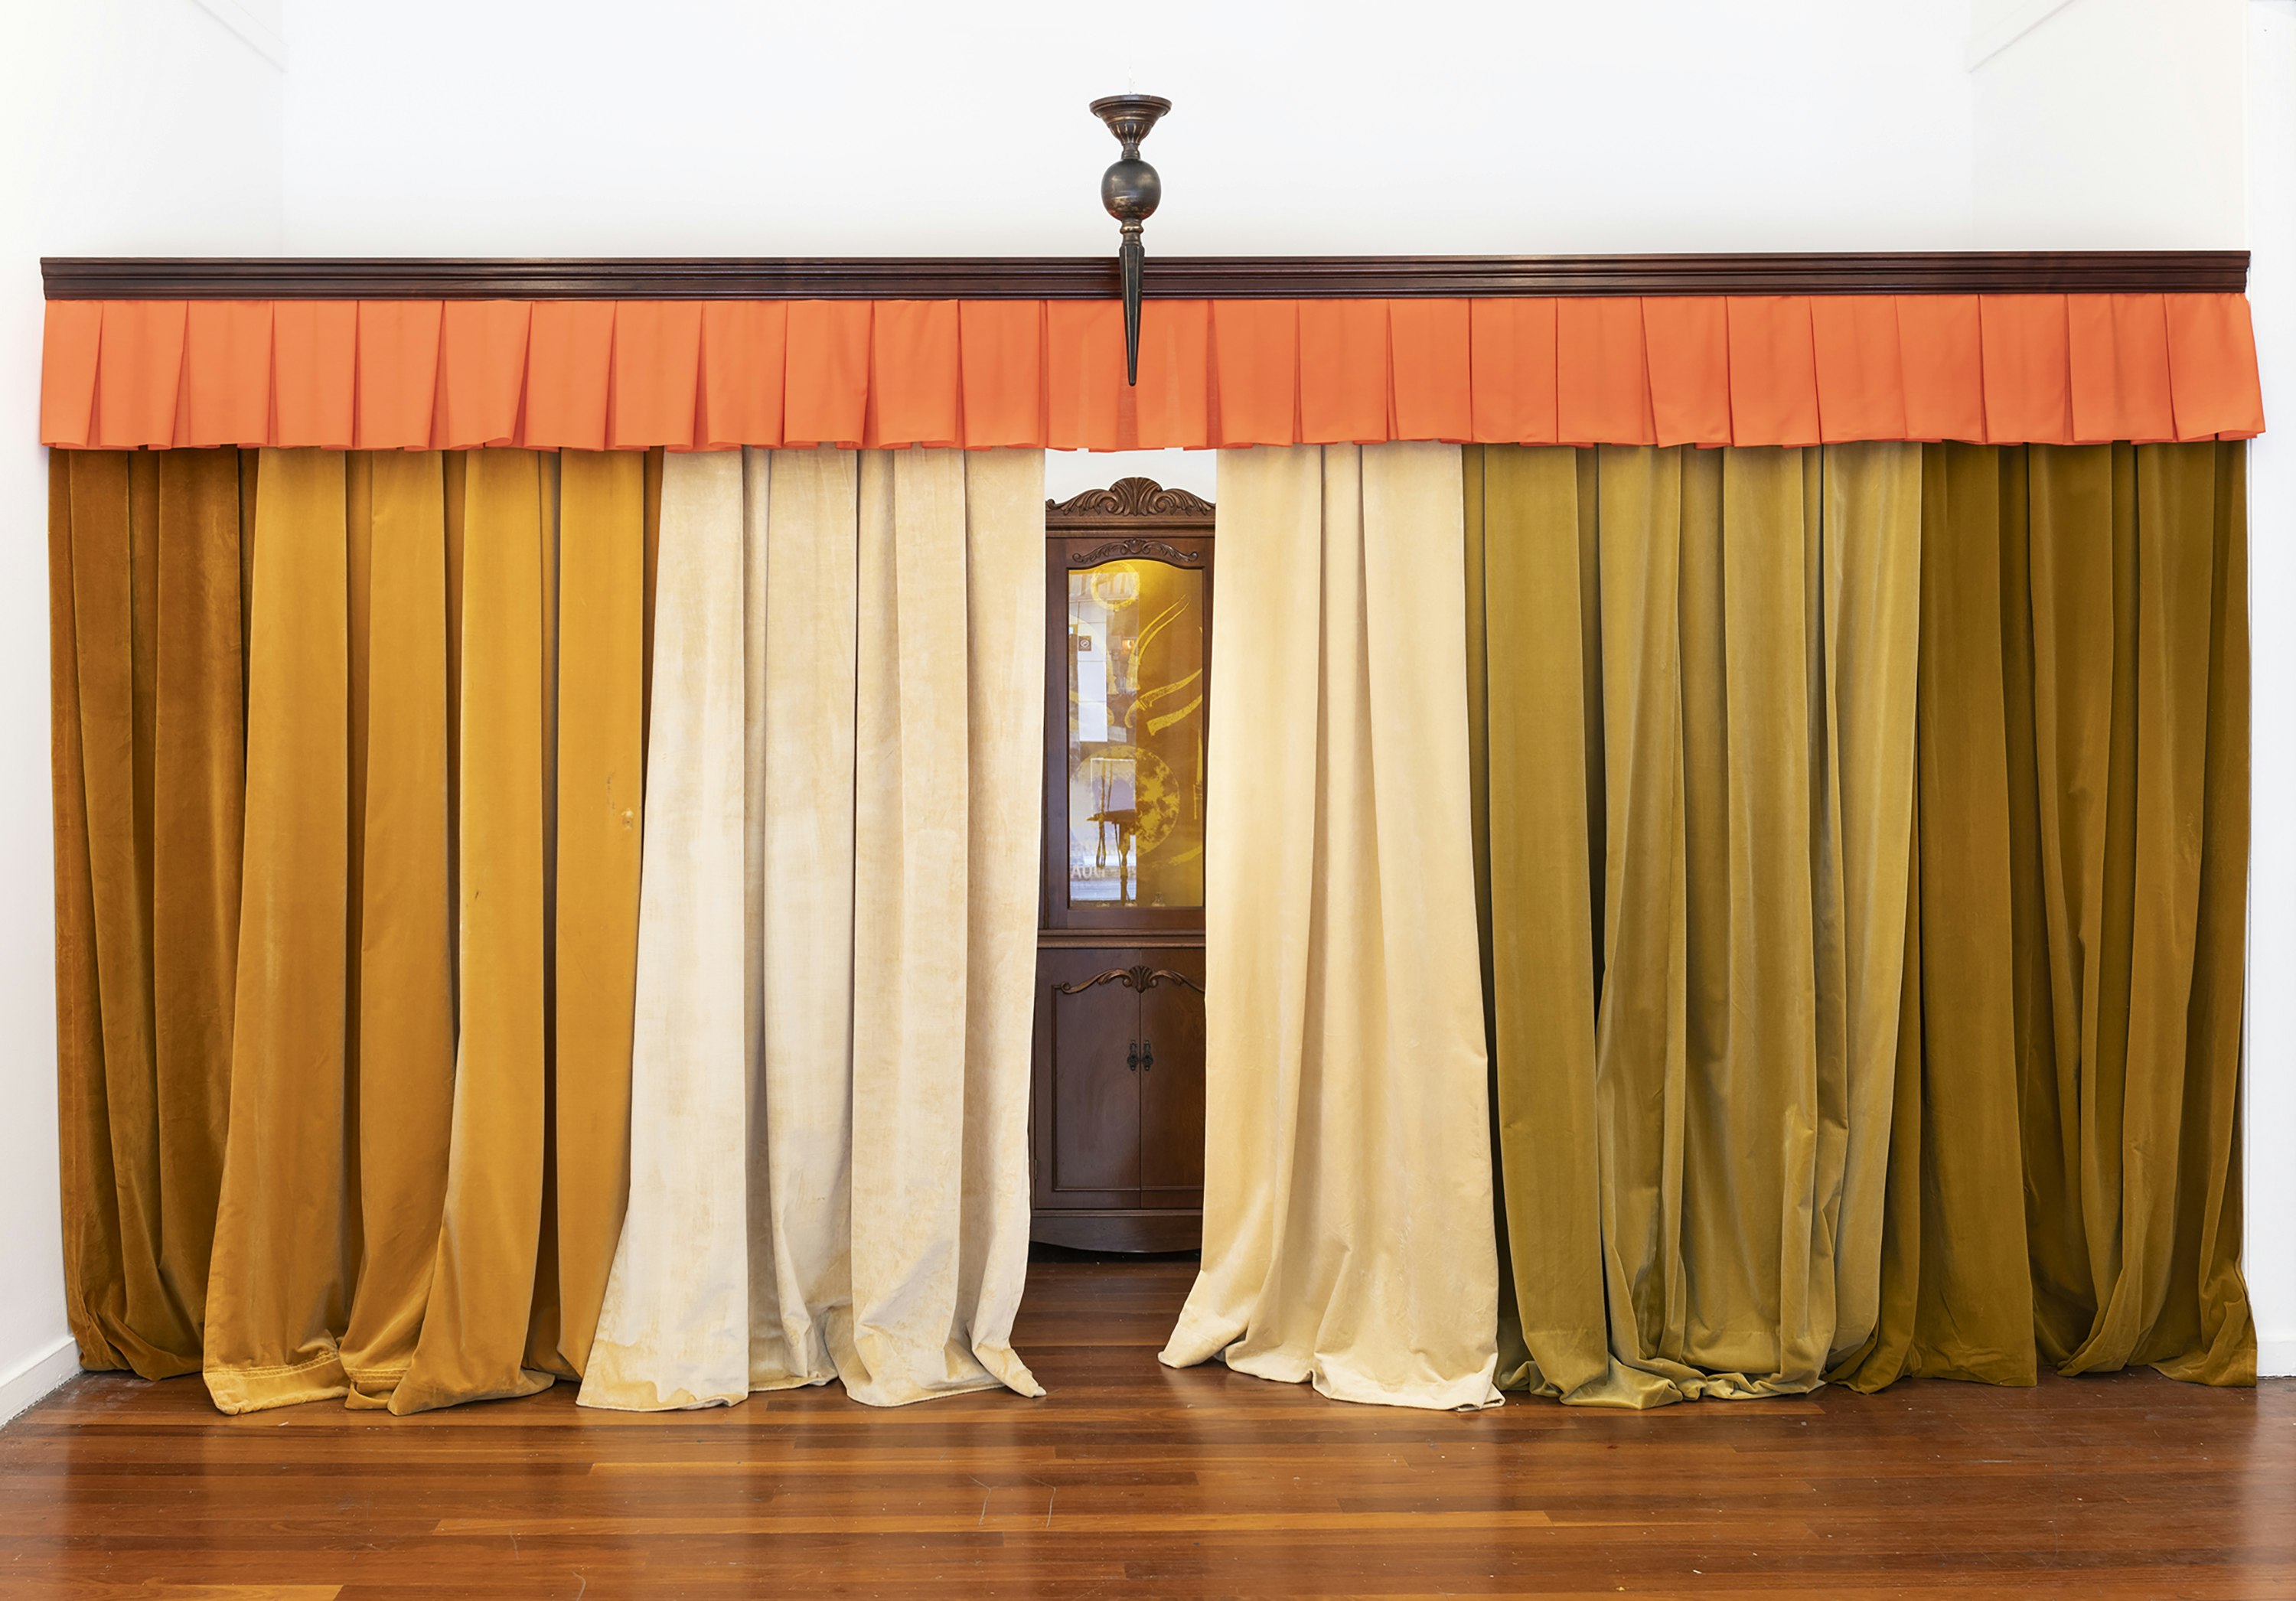 A curtain sewn from beige, light orange and brown fabrics under a bright orange curtain header. The curtain sweeps a hardwood timber floor. Through a middle parting in the curtain is a wooden glass cabinet.